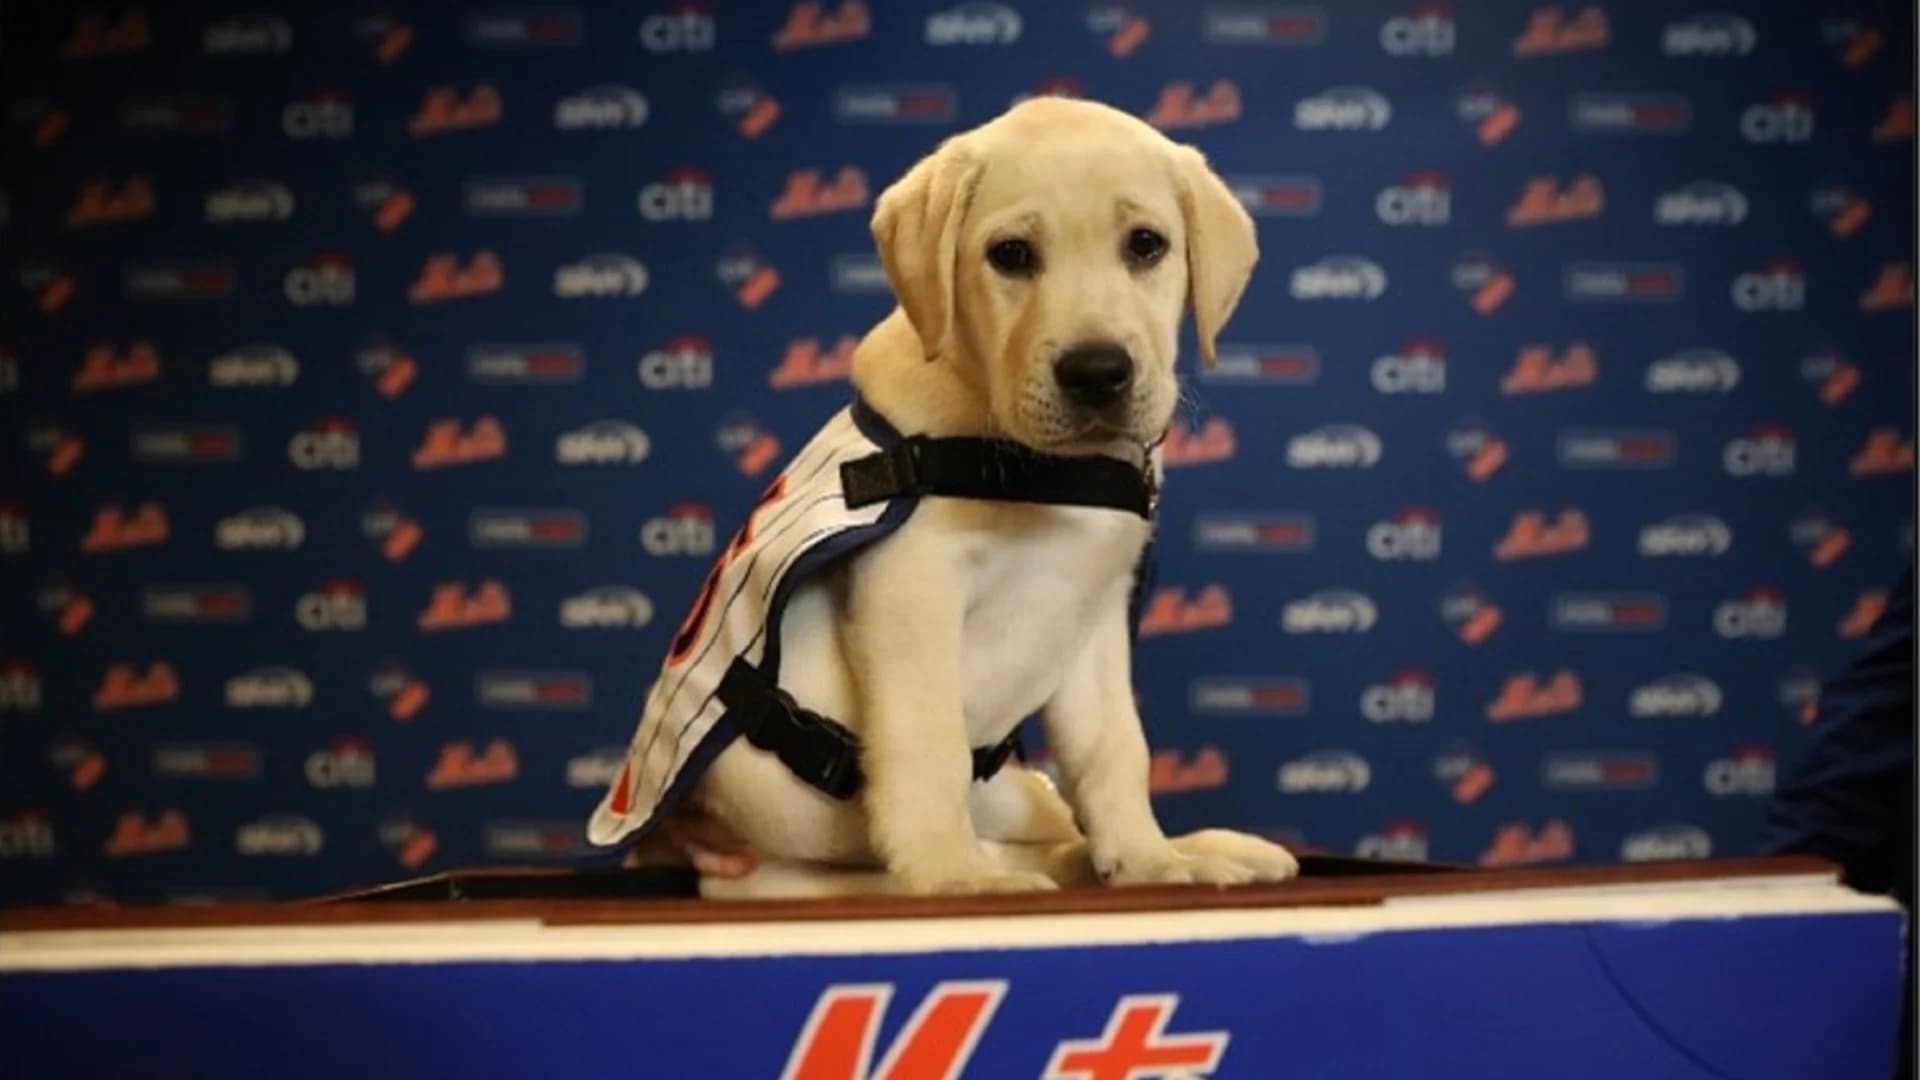 Mets announce future service dog in training. He needs a name